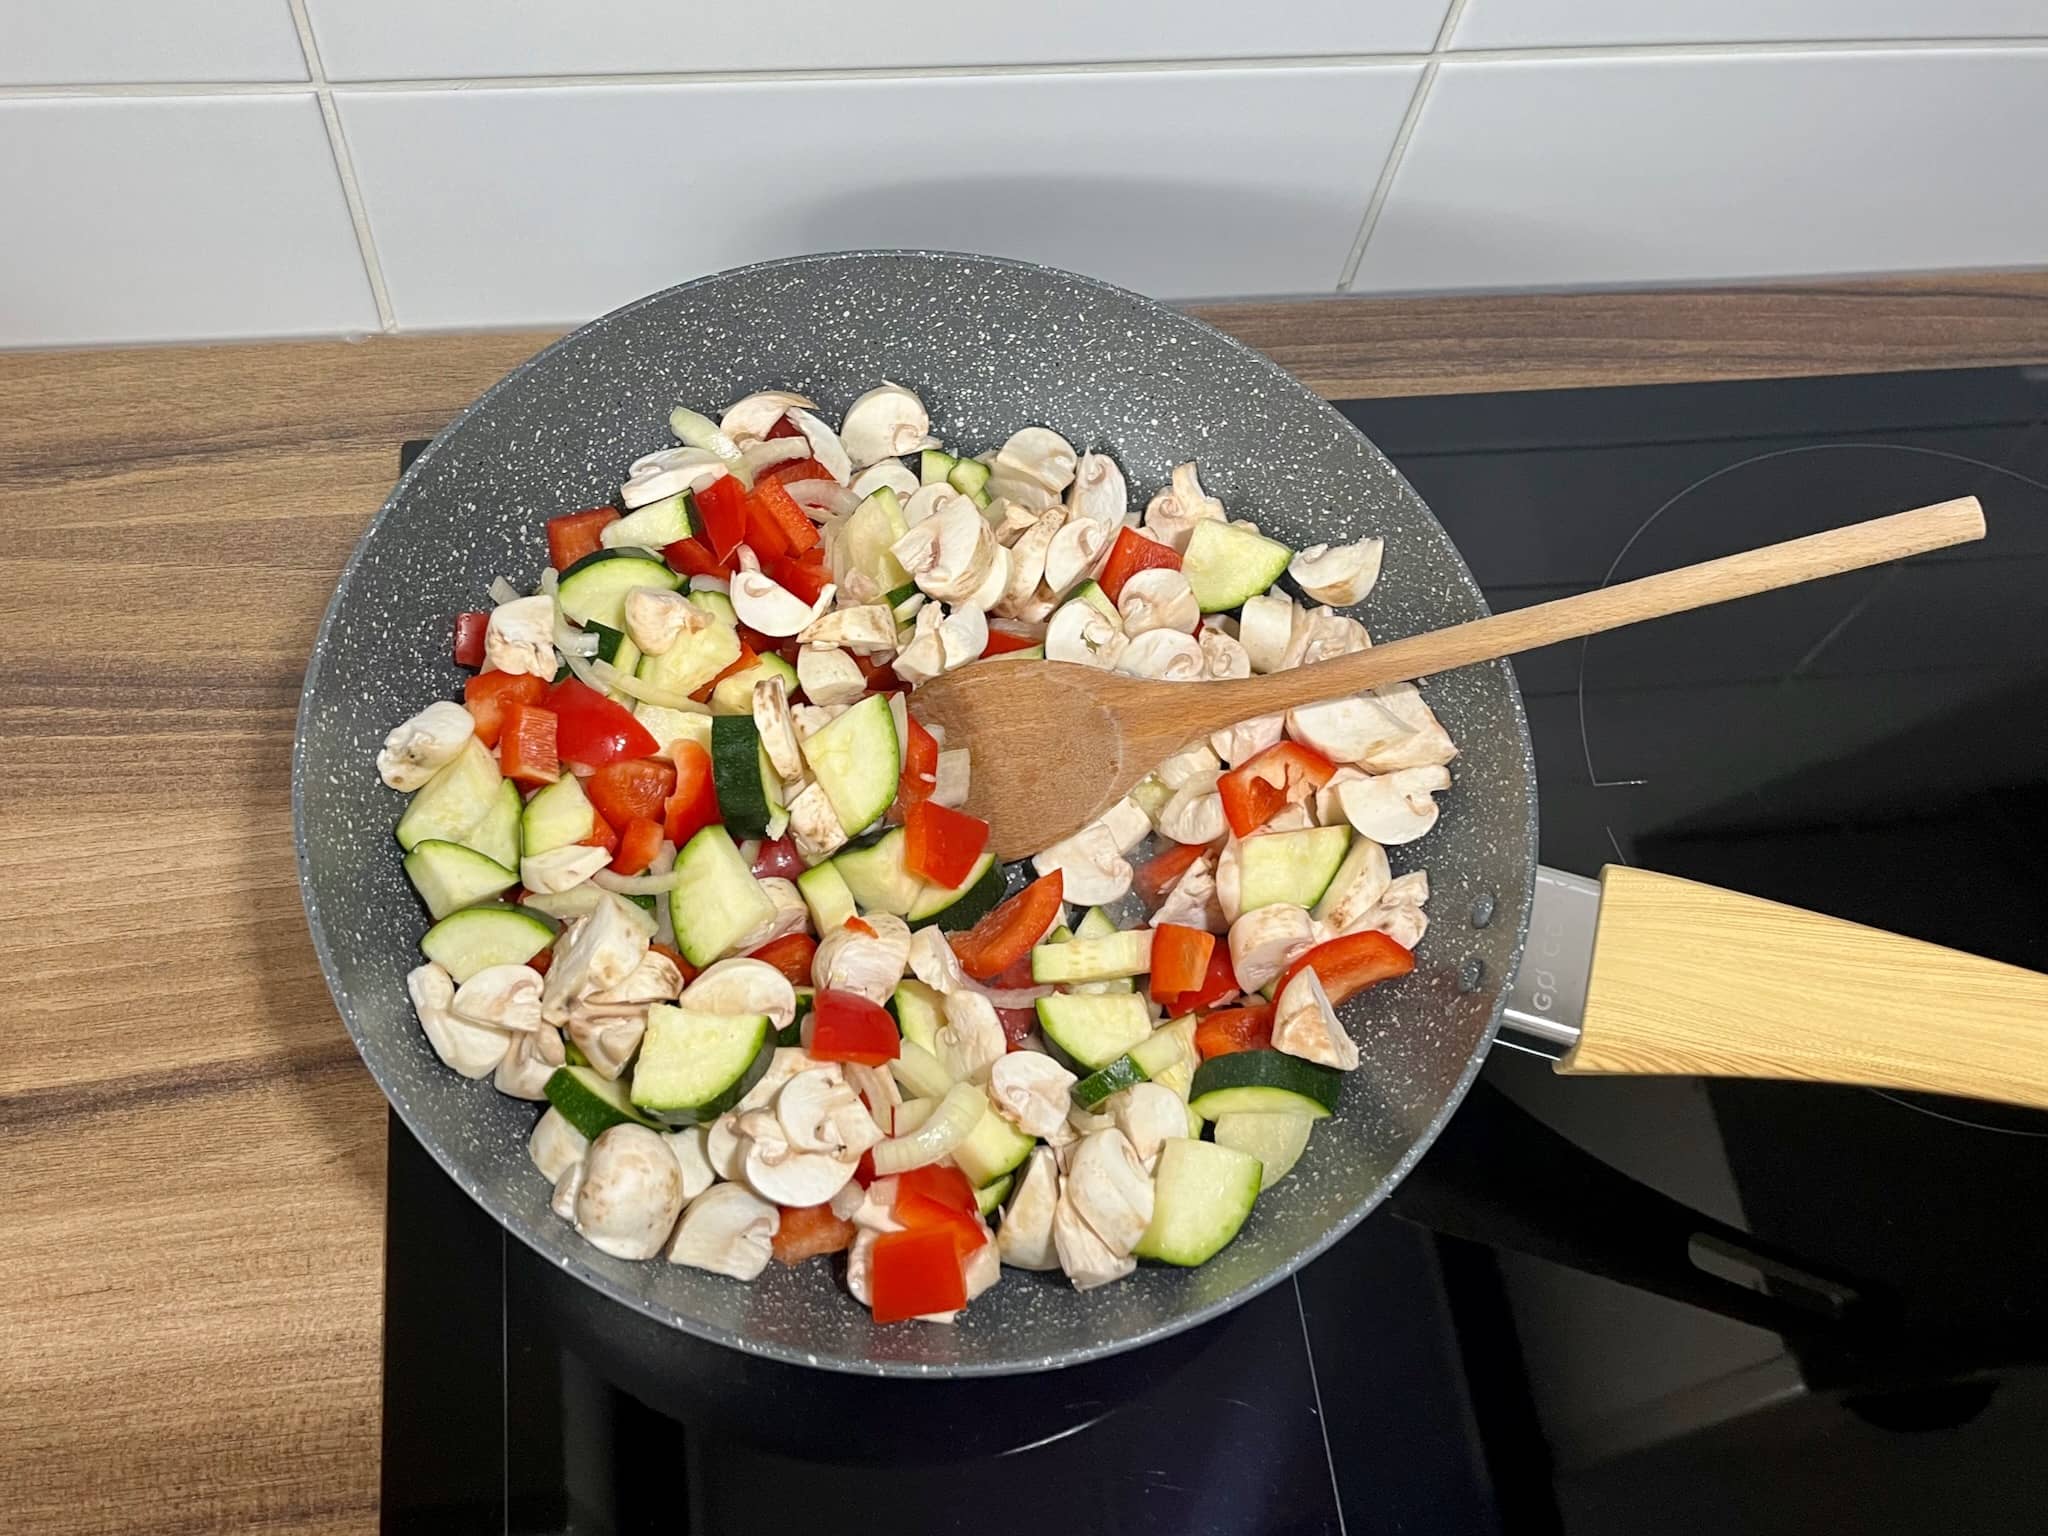 A large pan is filled with chopped vegetables, ready to be fried.